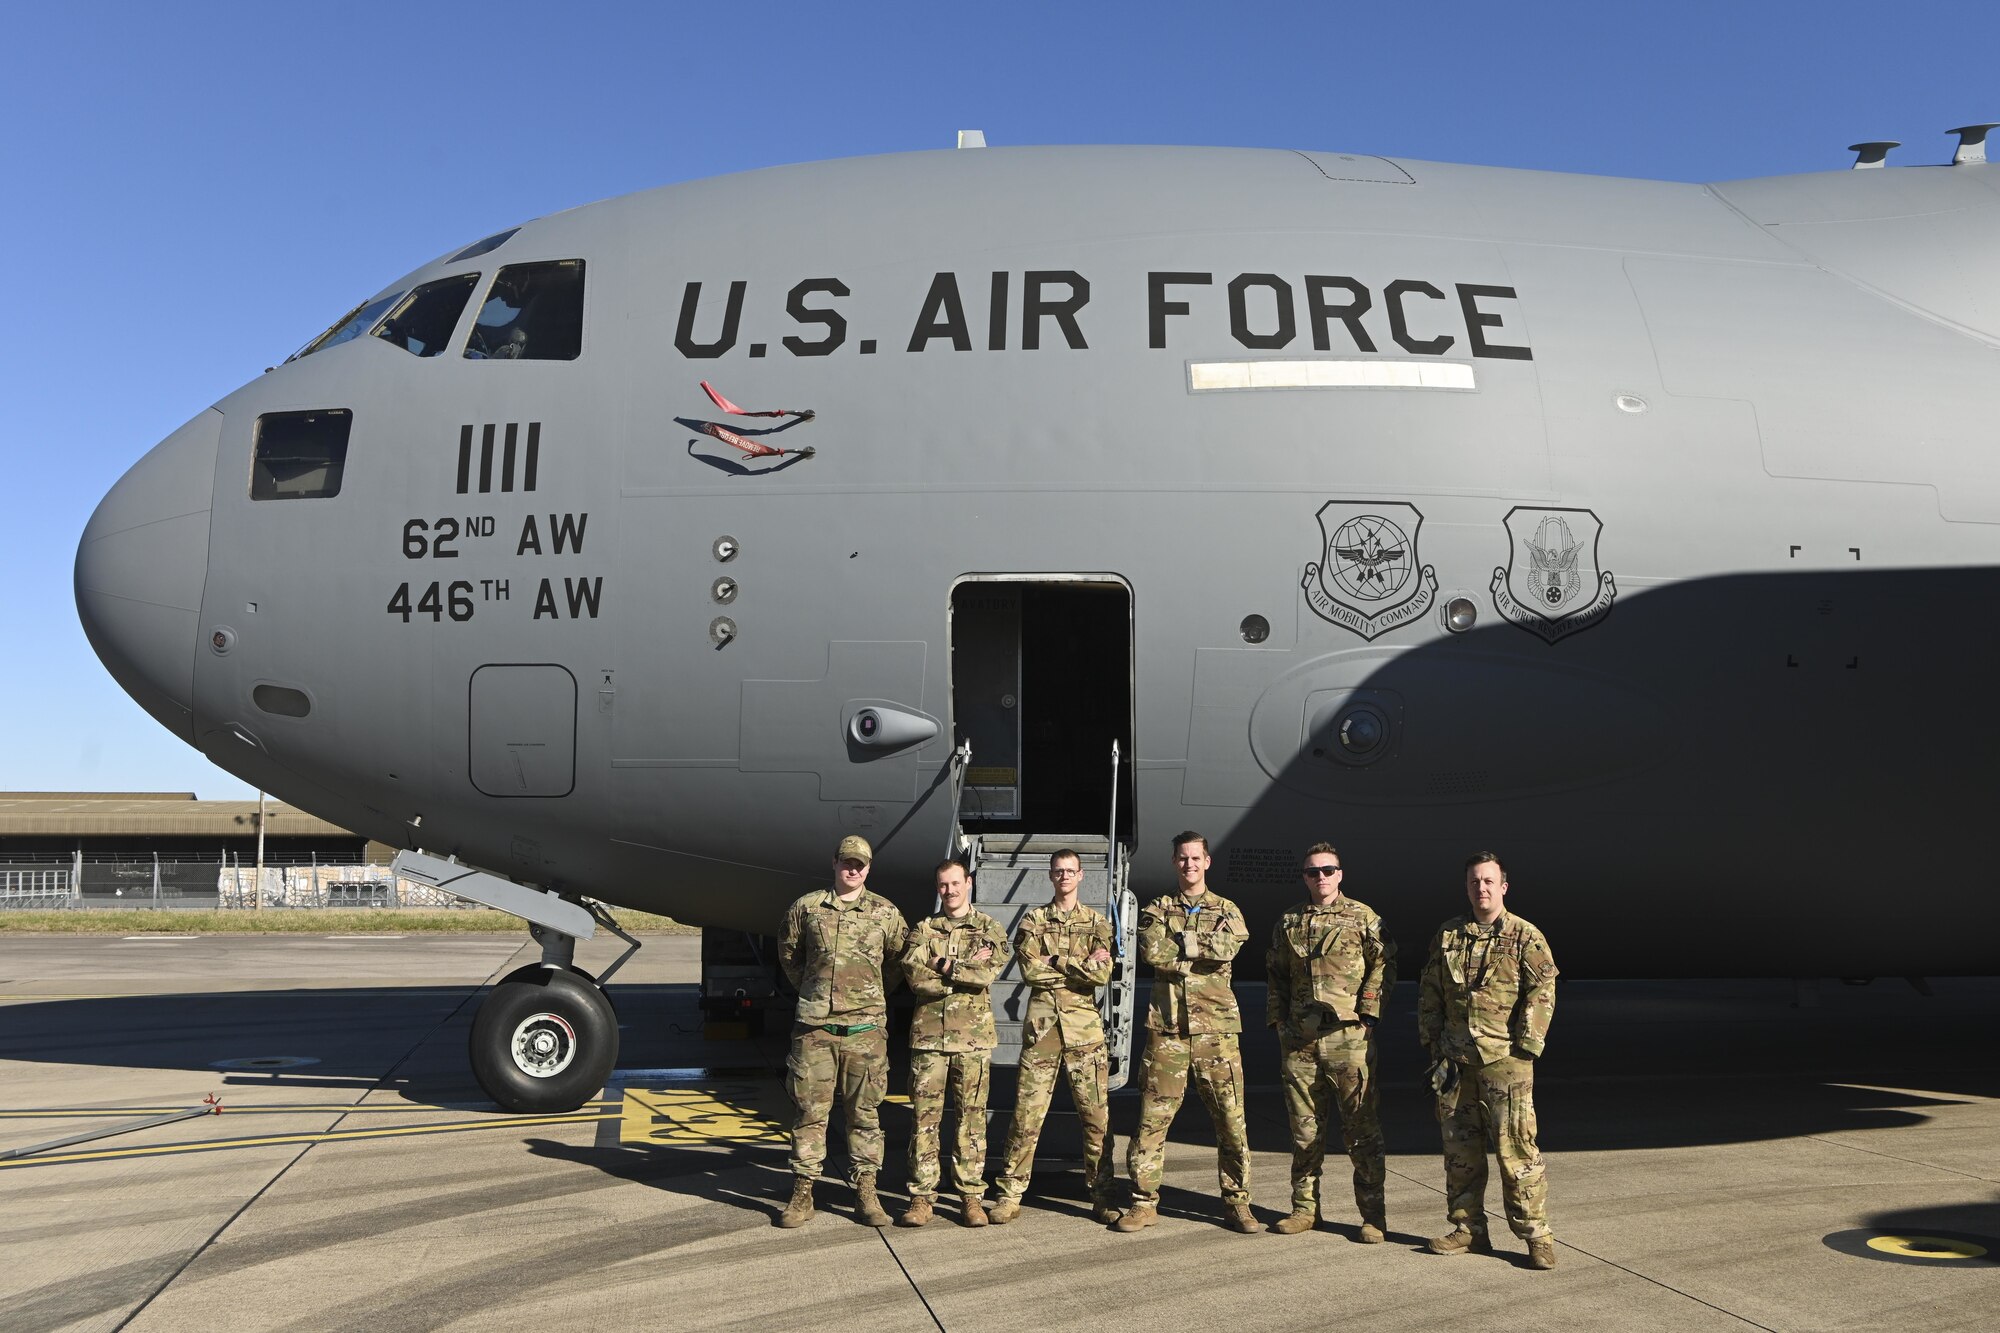 U.S. Airmen assigned to the 62nd Airlift Wing, Joint Base Lewis-McChord, Wash., landed at Royal Air Force Mildenhall, England, in their C-17 Globemaster III aircraft after transporting cargo to an air base in Norway, Feb. 27, 2022. RAF Mildenhall serves as a rest stop and gateway for transient aircrews conducting missions around the globe. (U.S. Air Force photo by Senior Airman Joseph Barron)